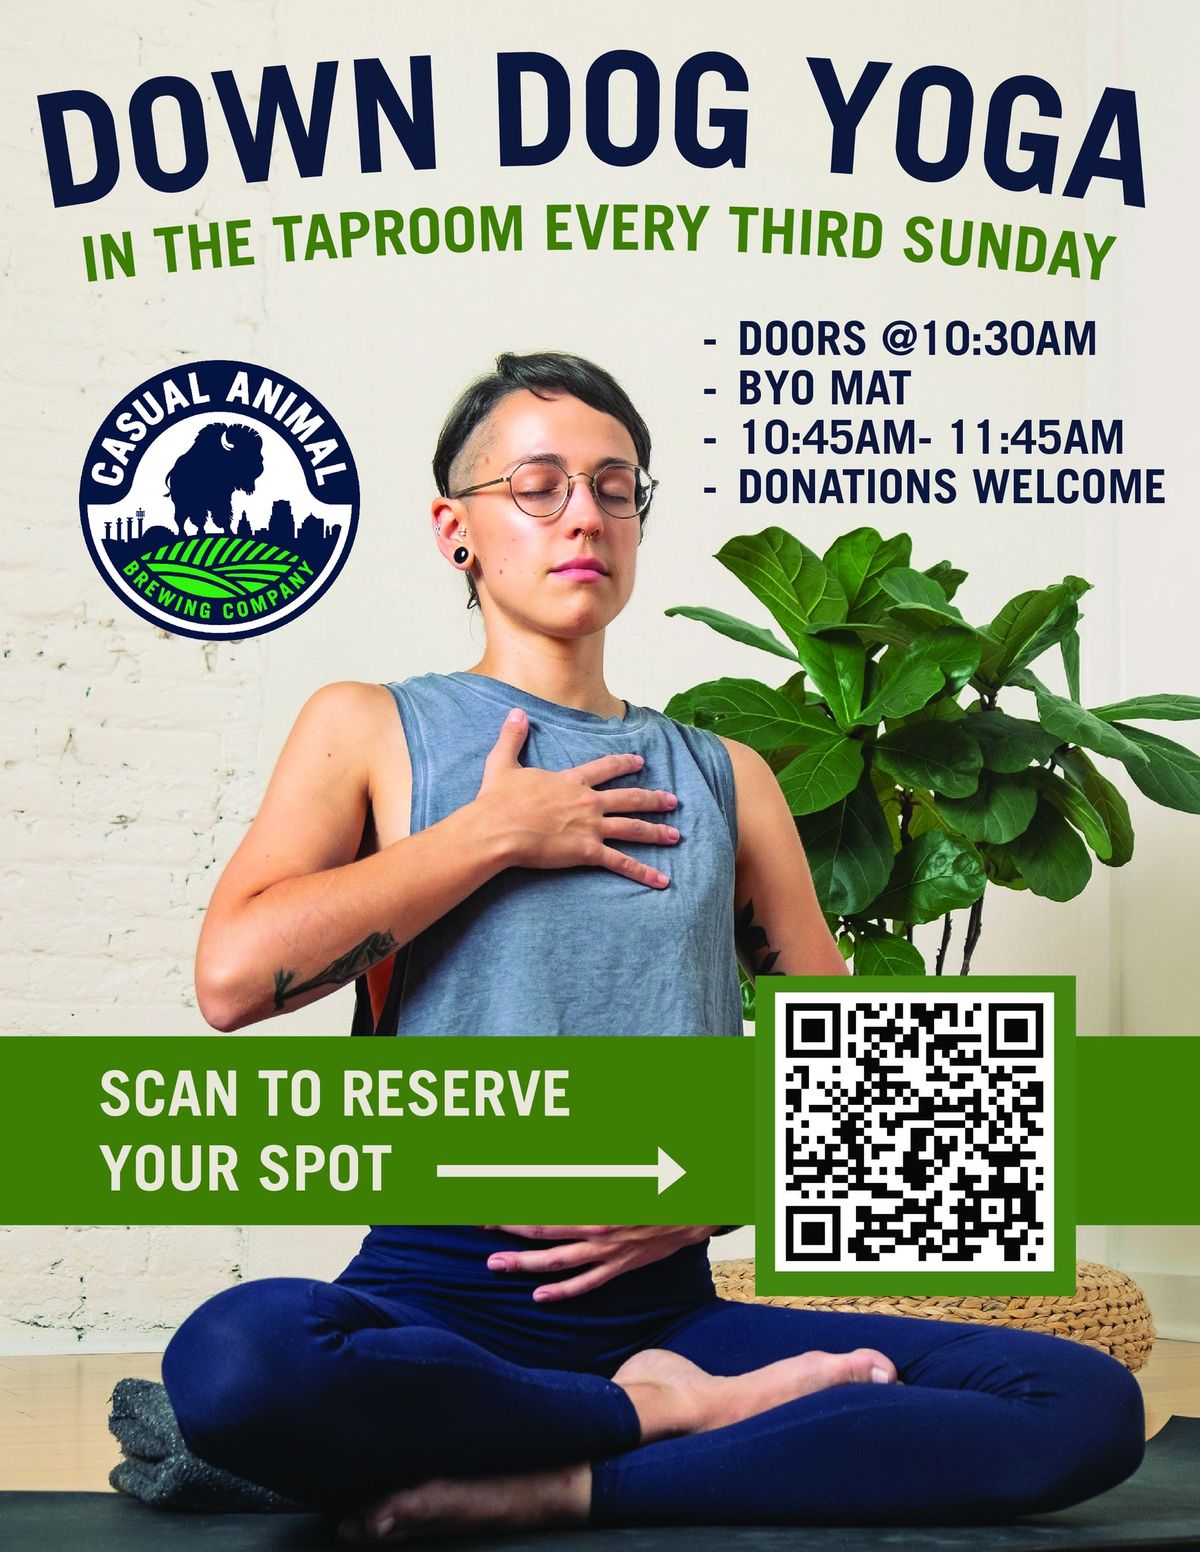 Down Dog Yoga at Casual Animal Brewing (Every 3rd Sunday)